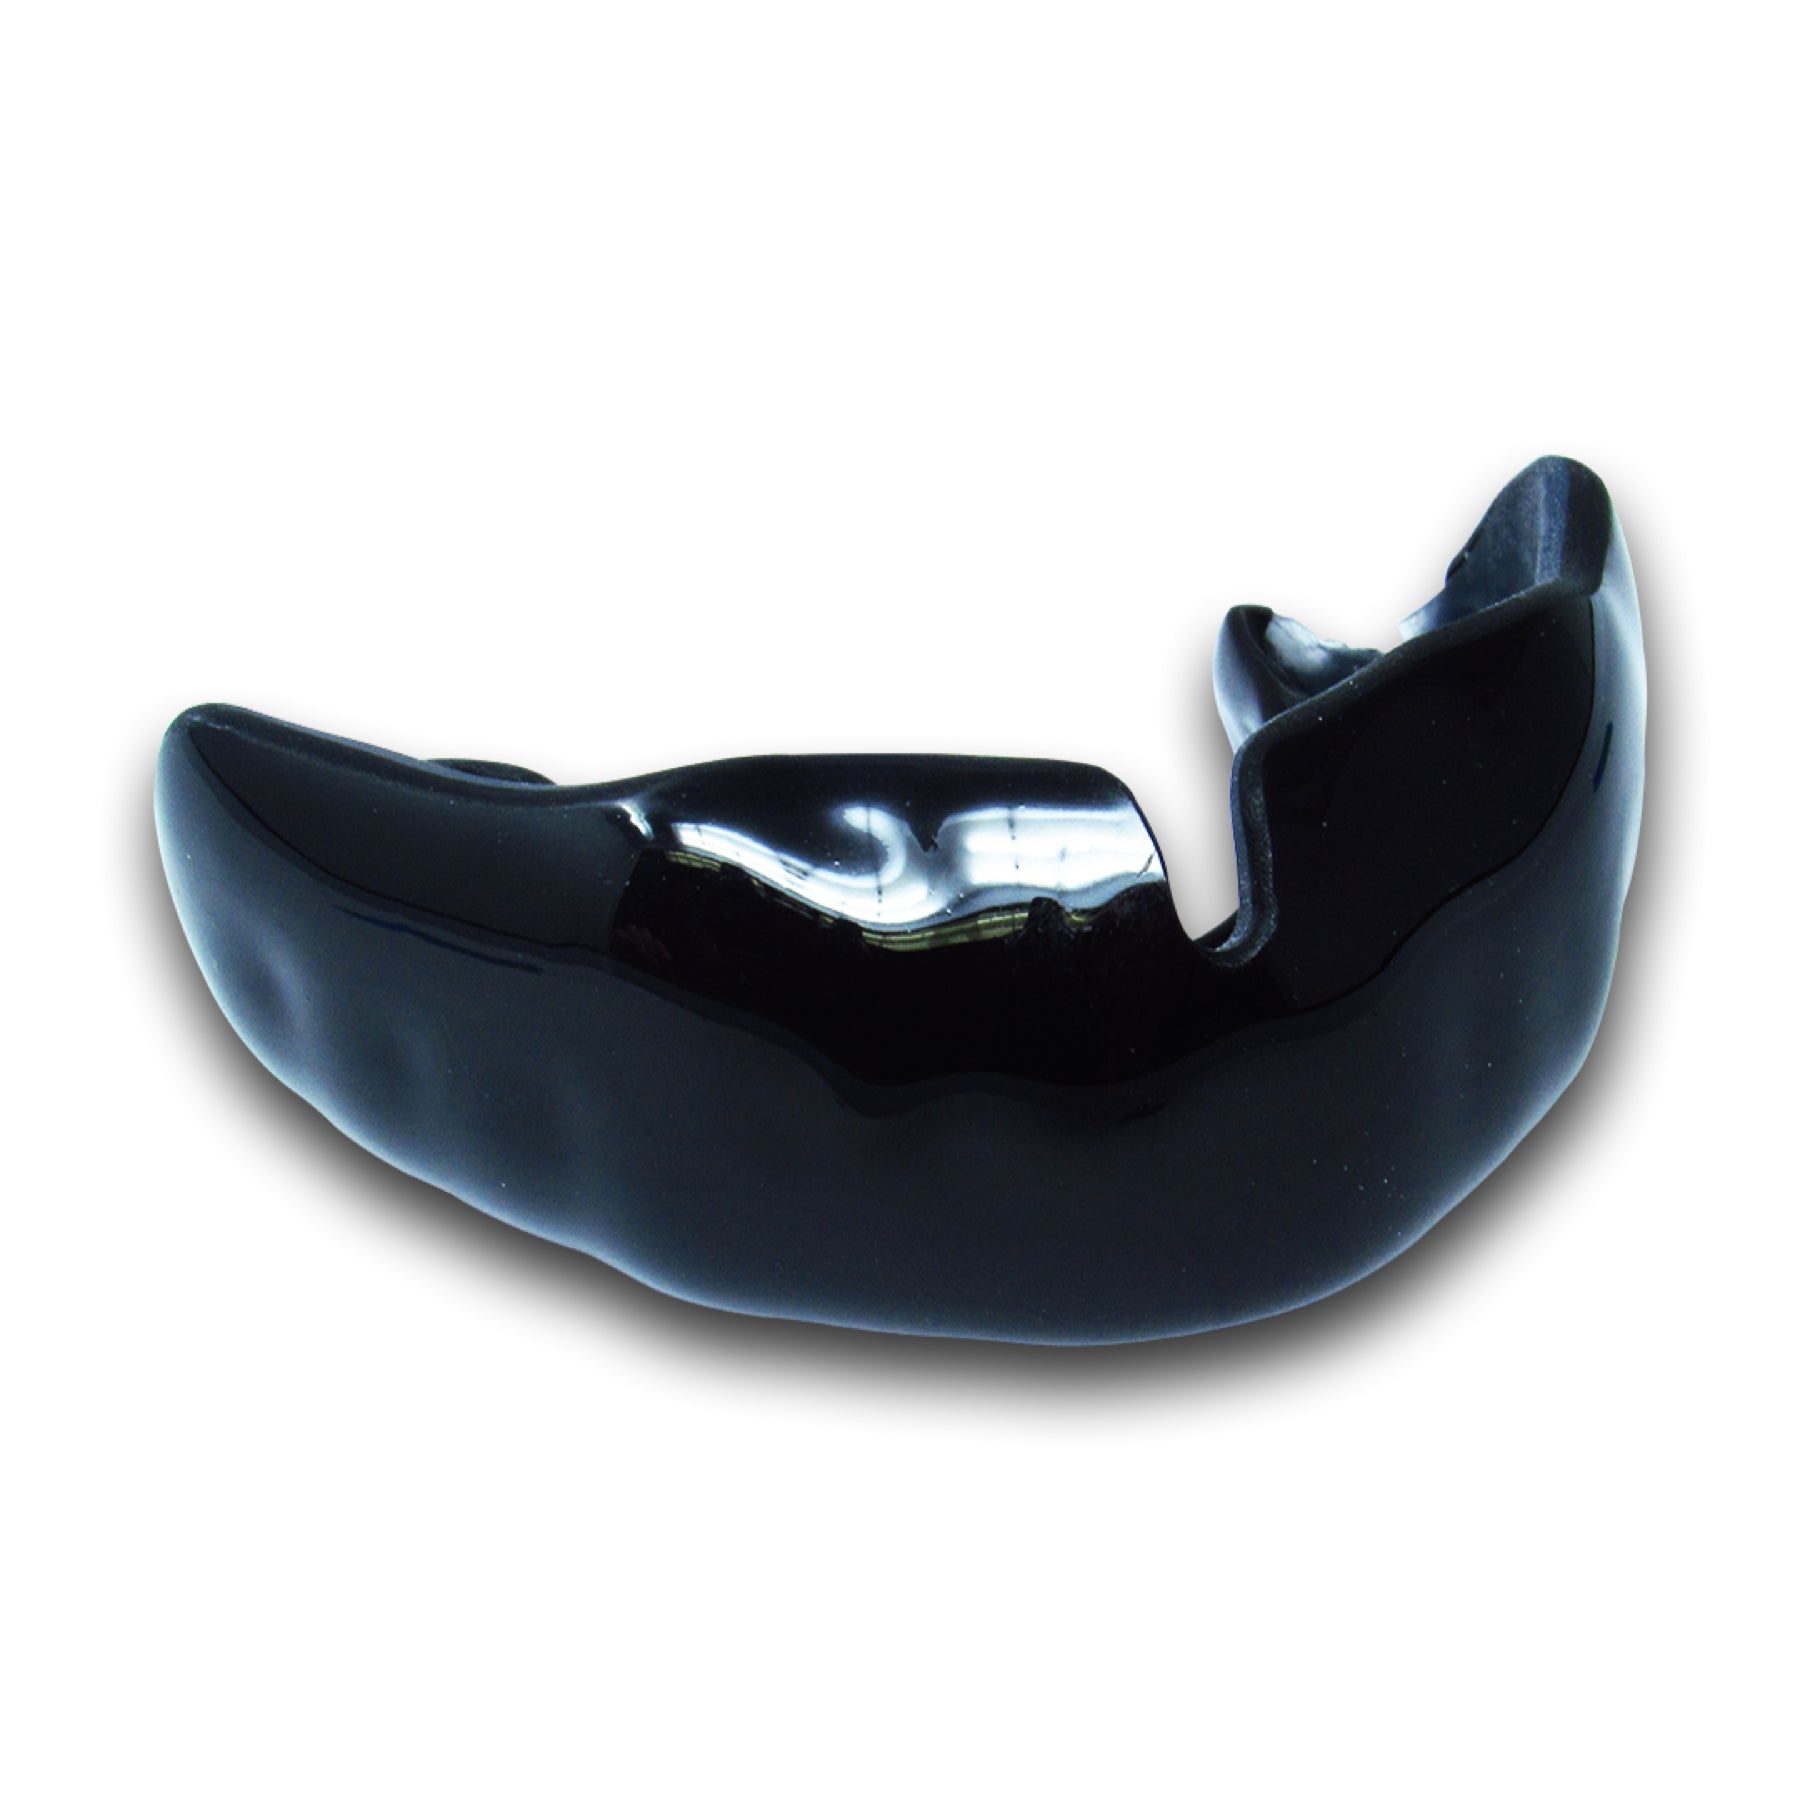 customized mouthguards by Mouthpiece Guy